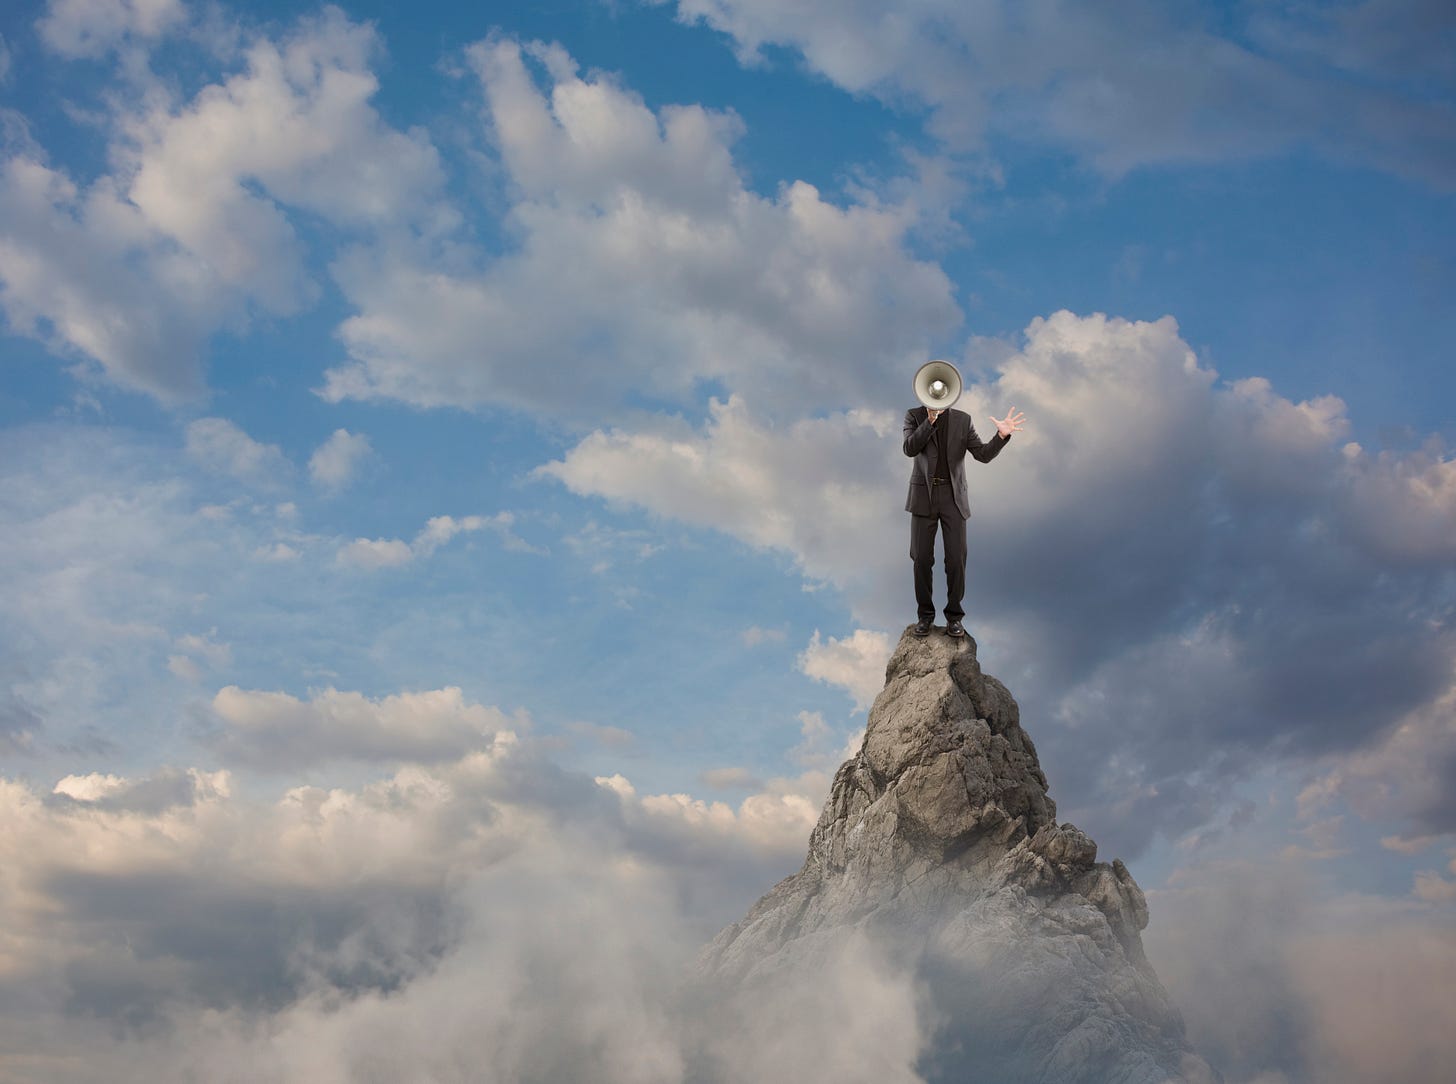 A person in a suit standing on a rocky  mountain pinnacle speaking into a hand held megaphone